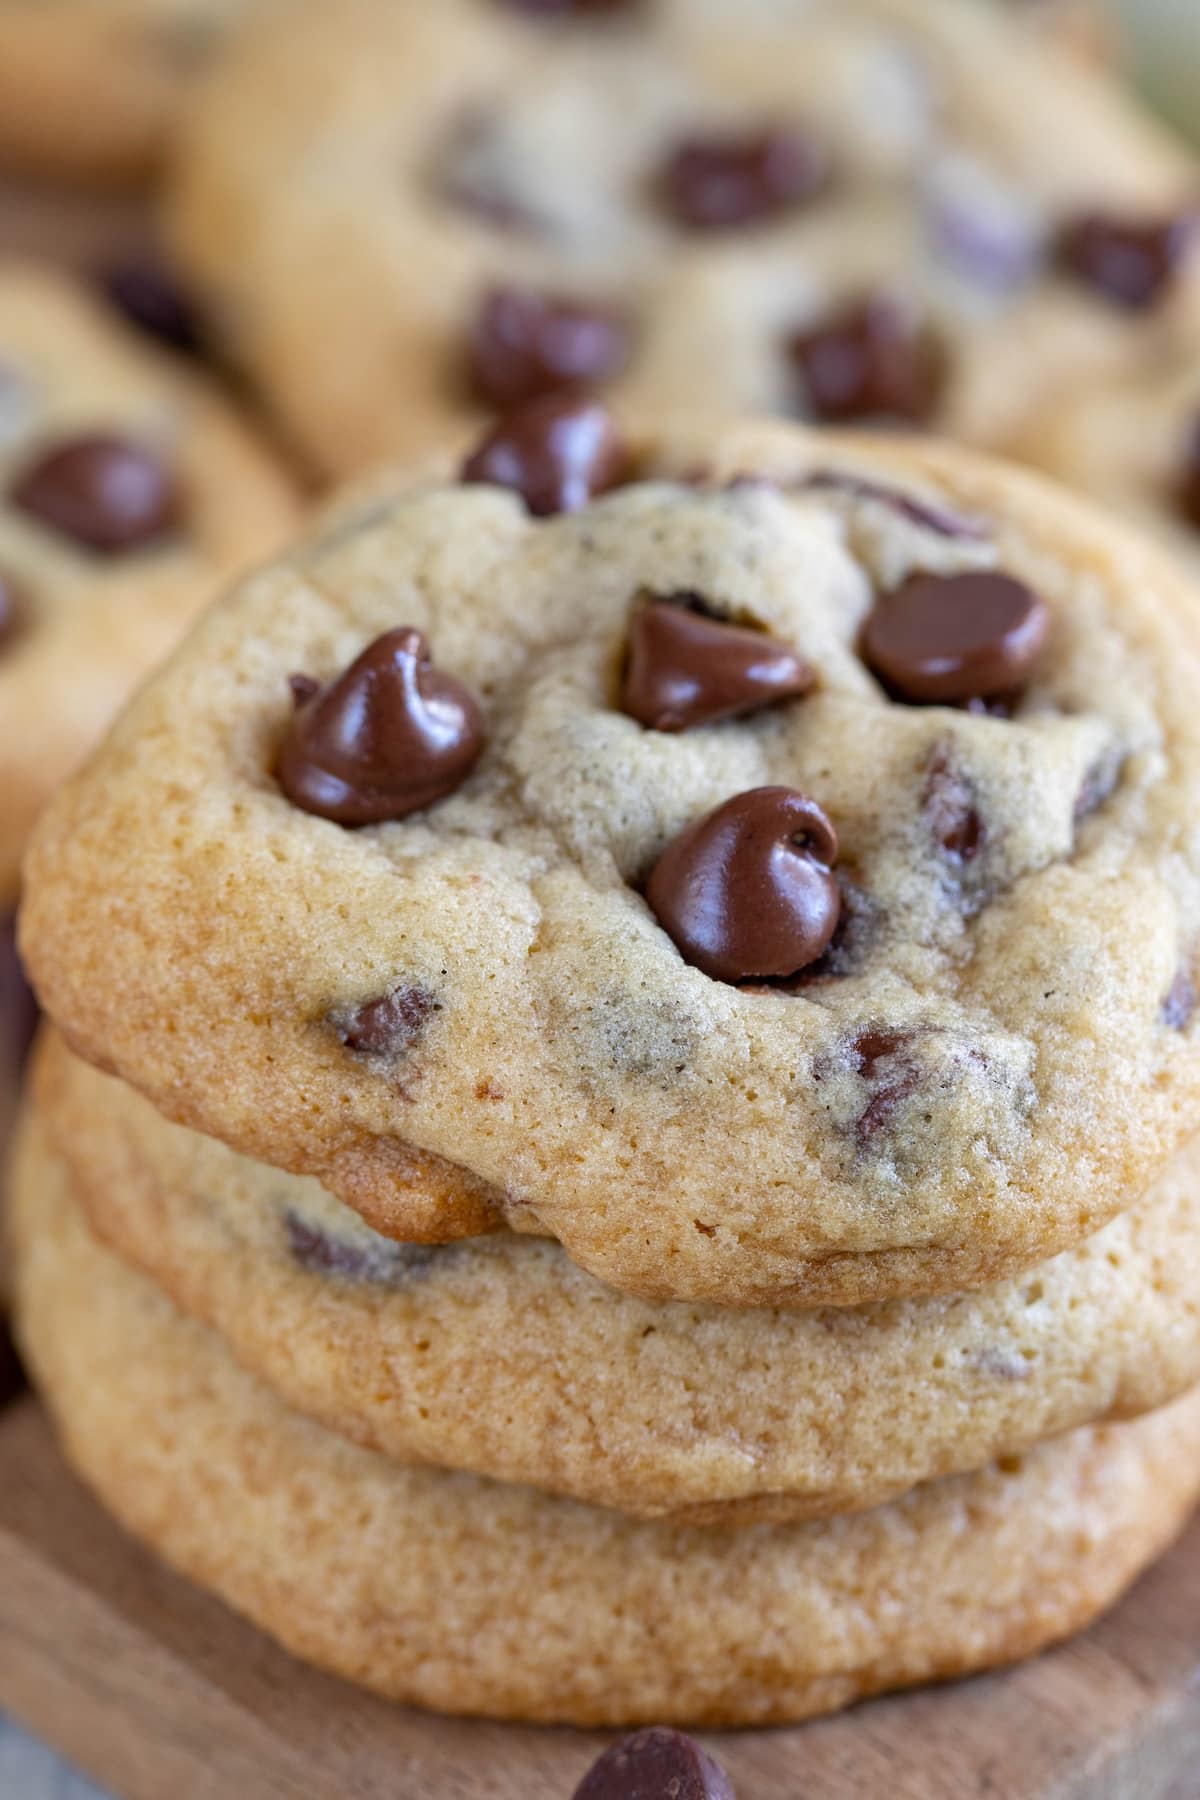 stacked chocolate chip cookies with melted chocolate chips baked in.